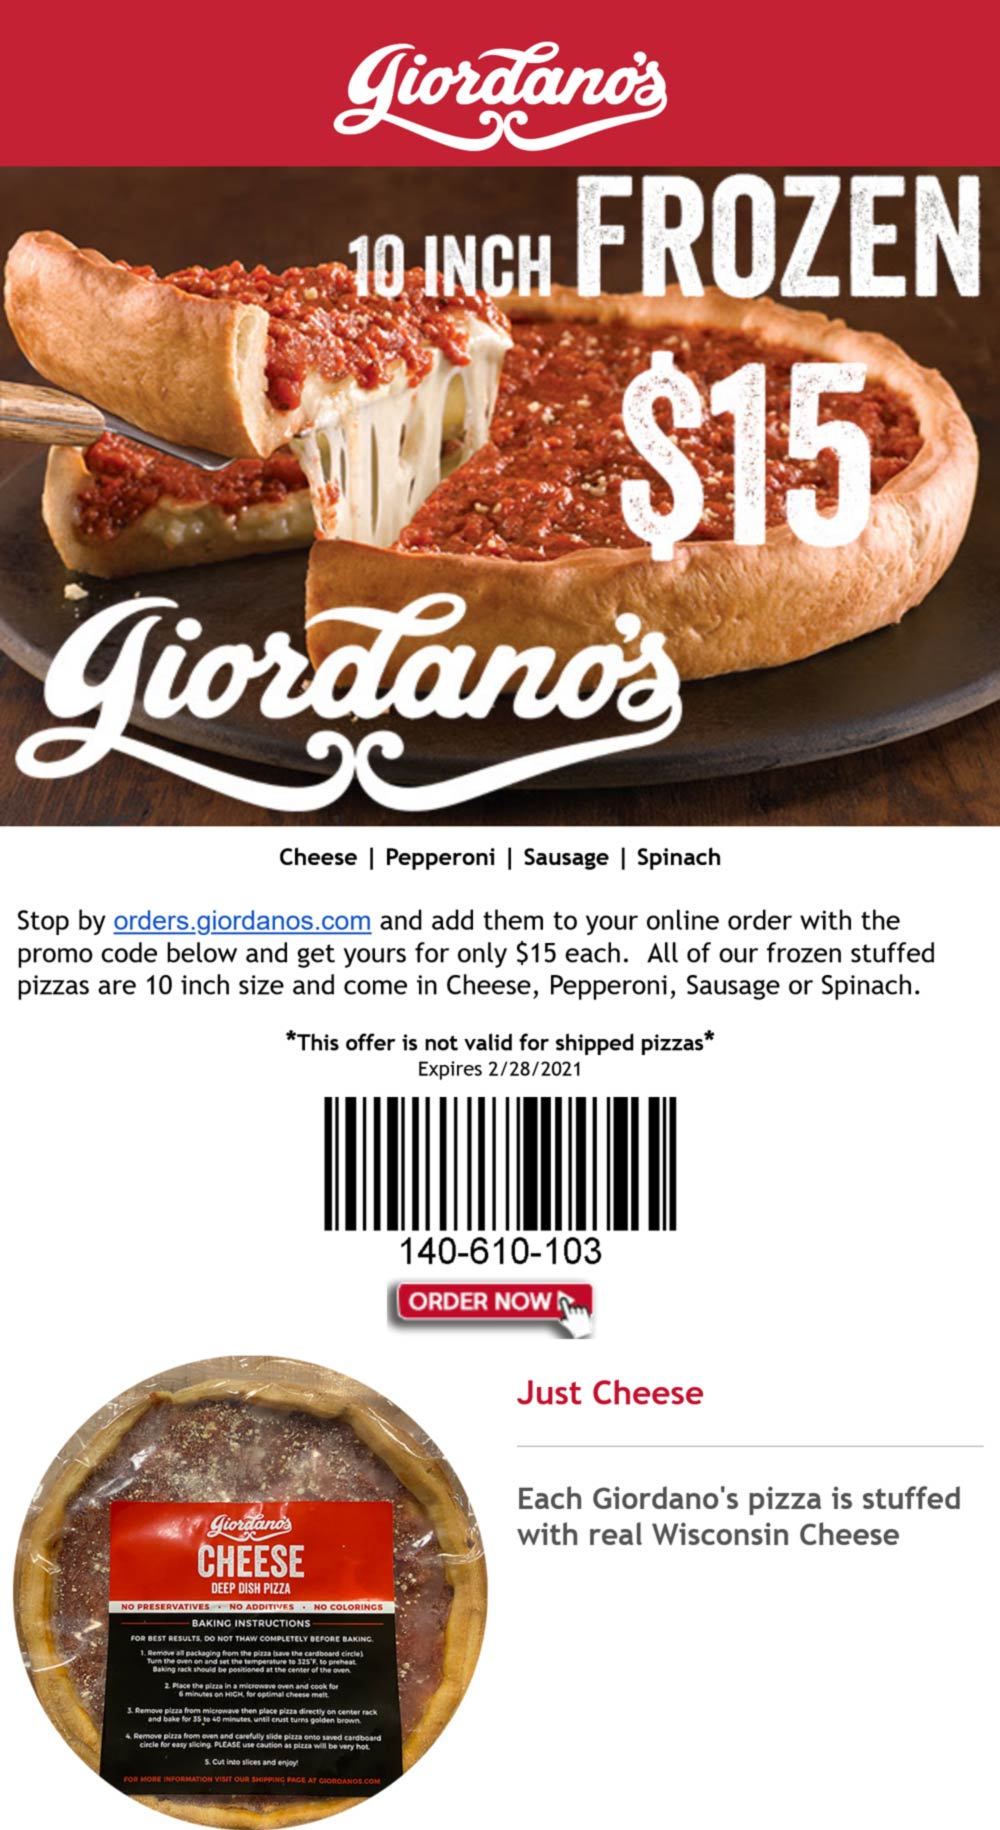 Giordanos restaurants Coupon  10 in frozen spinach, sausage, pepperoni or cheese stuffed pizza for $15 at Giordanos #giordanos 